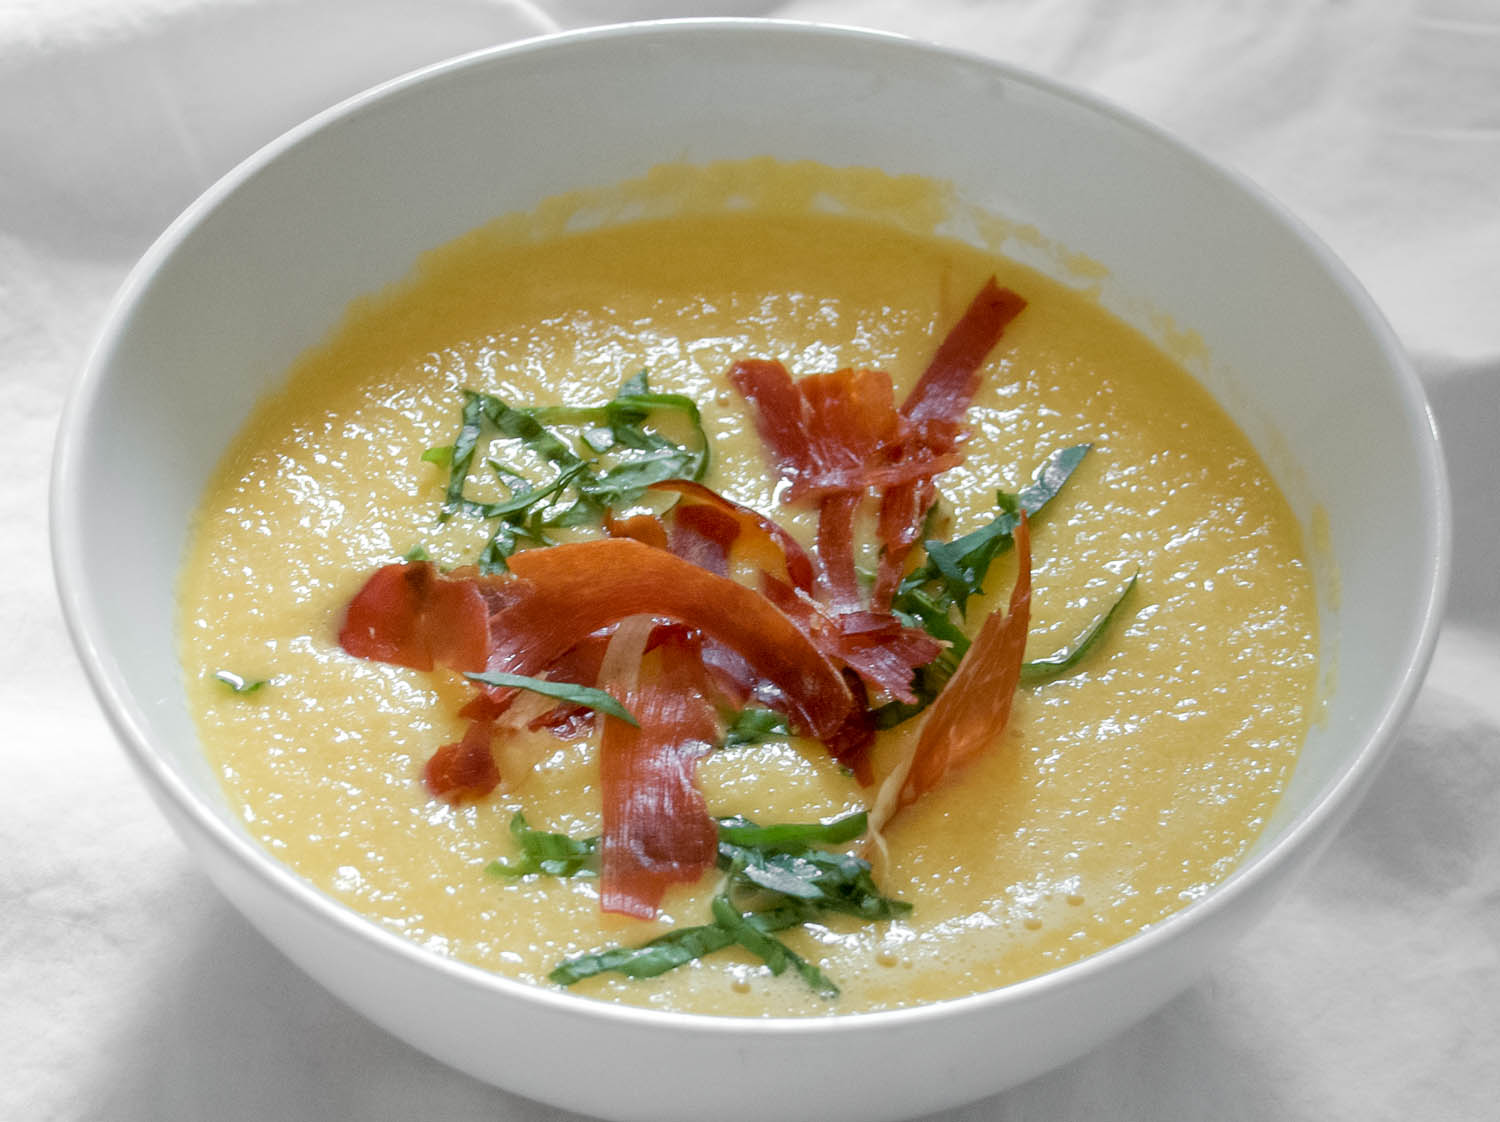 Cold soups for summer: Cantaloupe Gazpacho with Crispy Prosciutto from Serious Eats